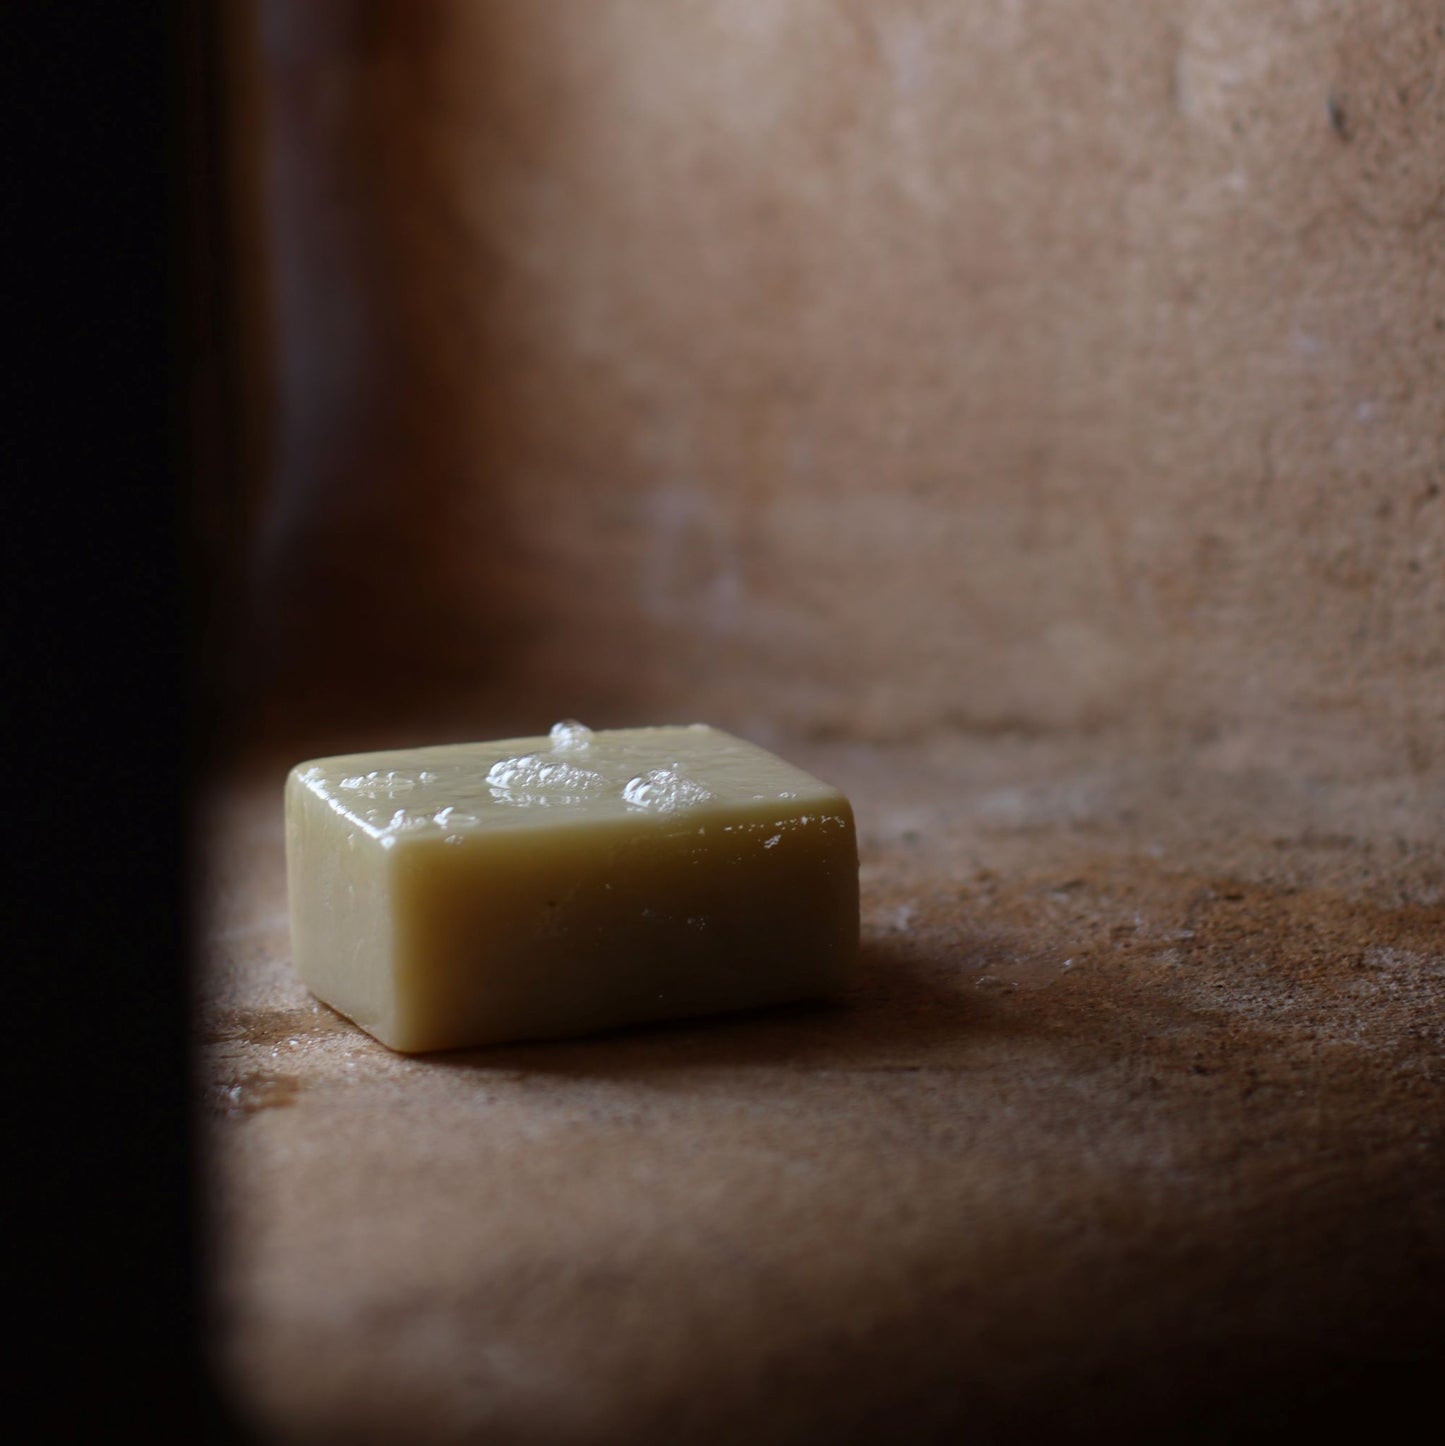 Natural Solid Soap